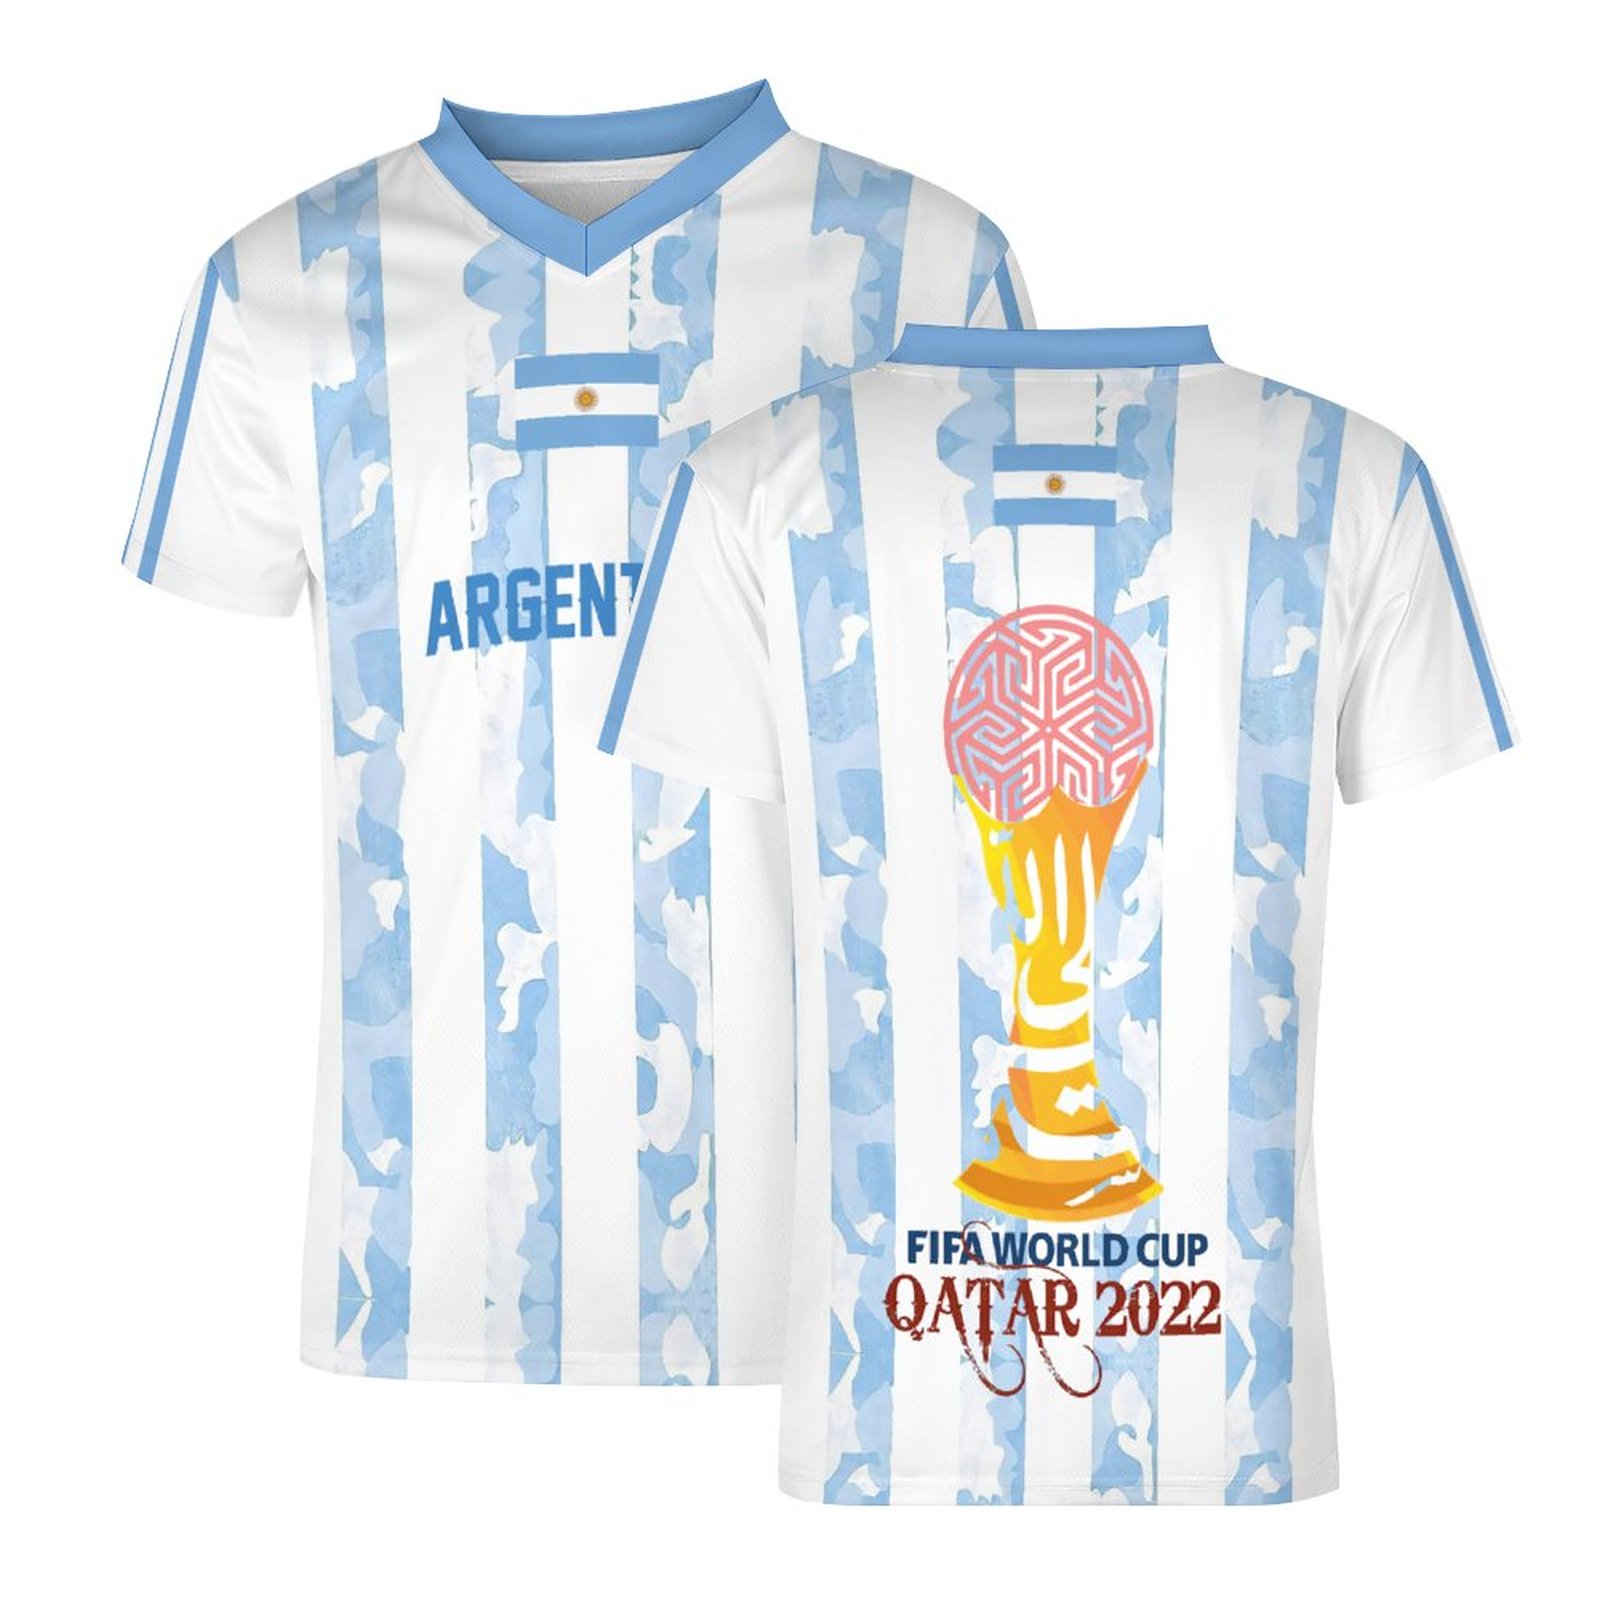 Argentina FIFA 2022 World Cup Men's Exclusive Design Soccer Jersey